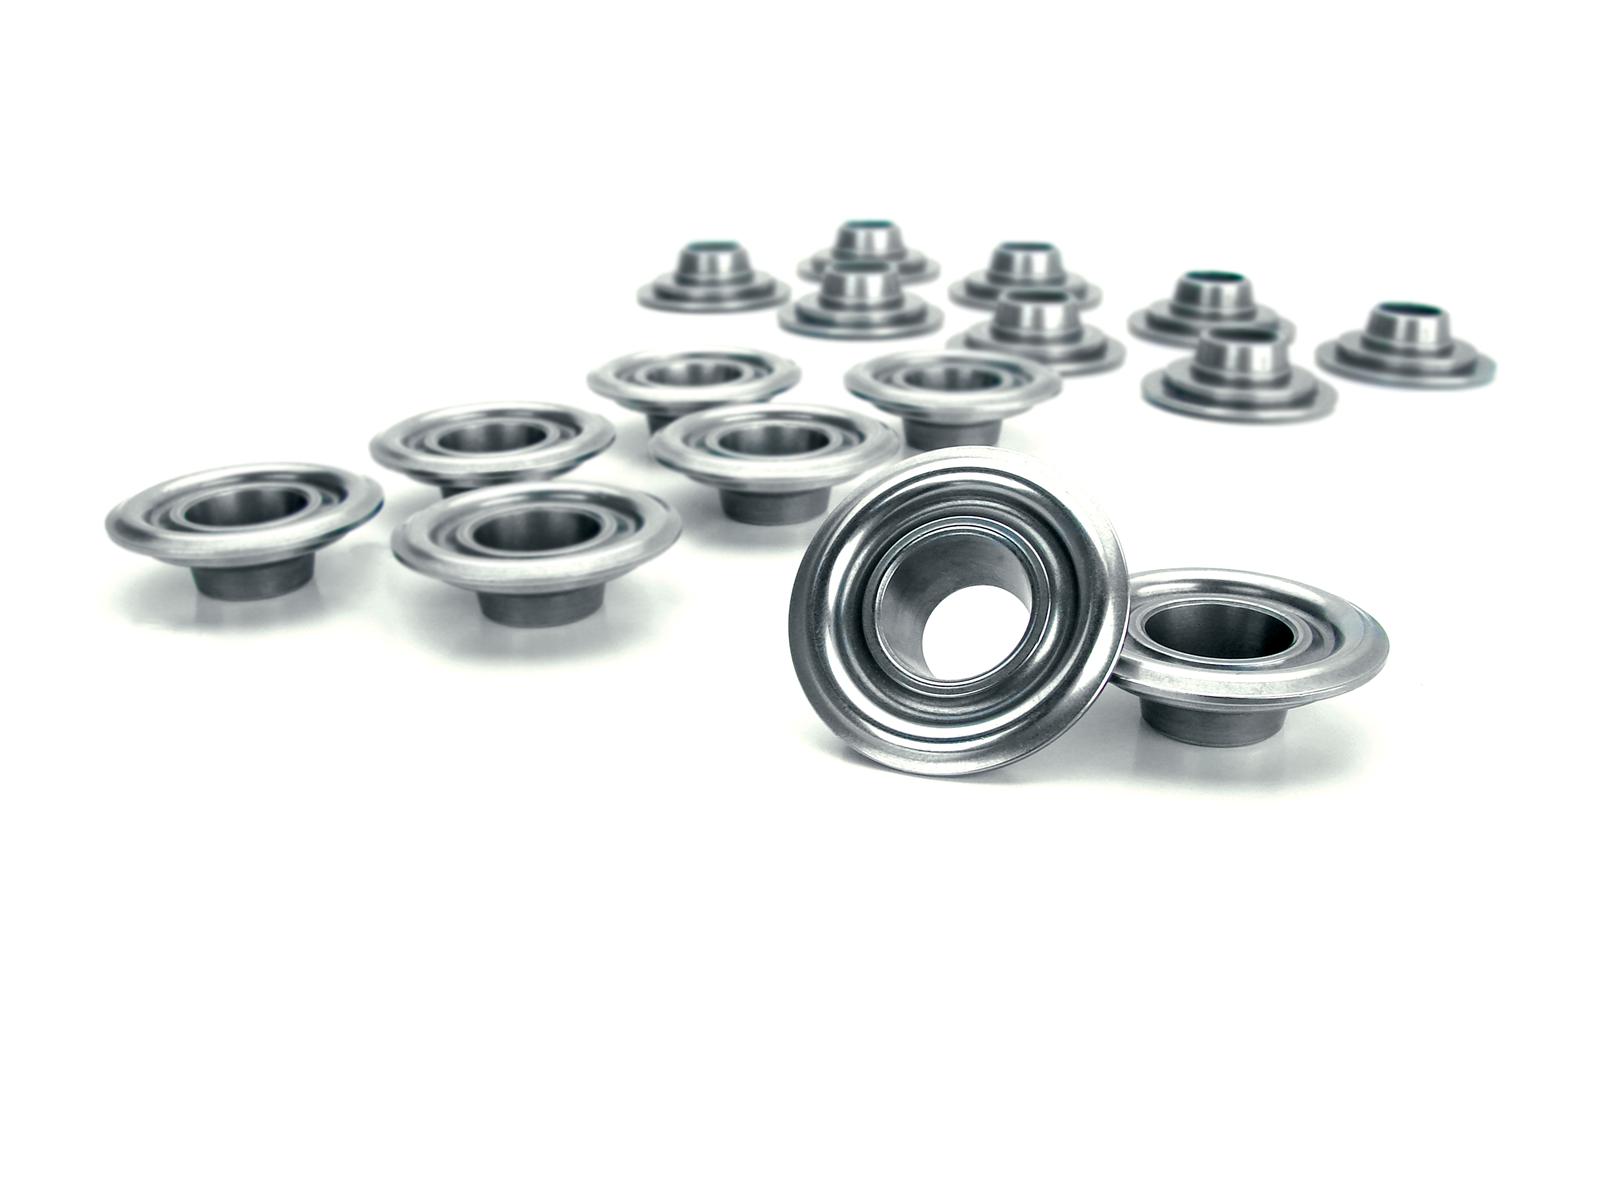 10 degree Angle for 1.500-1.550 Diameter Valve Springs 10 degree Angle for 1.500-1.550 Diameter Valve Springs COMP Cams Competition Cams 748-16 Steel Retainers 